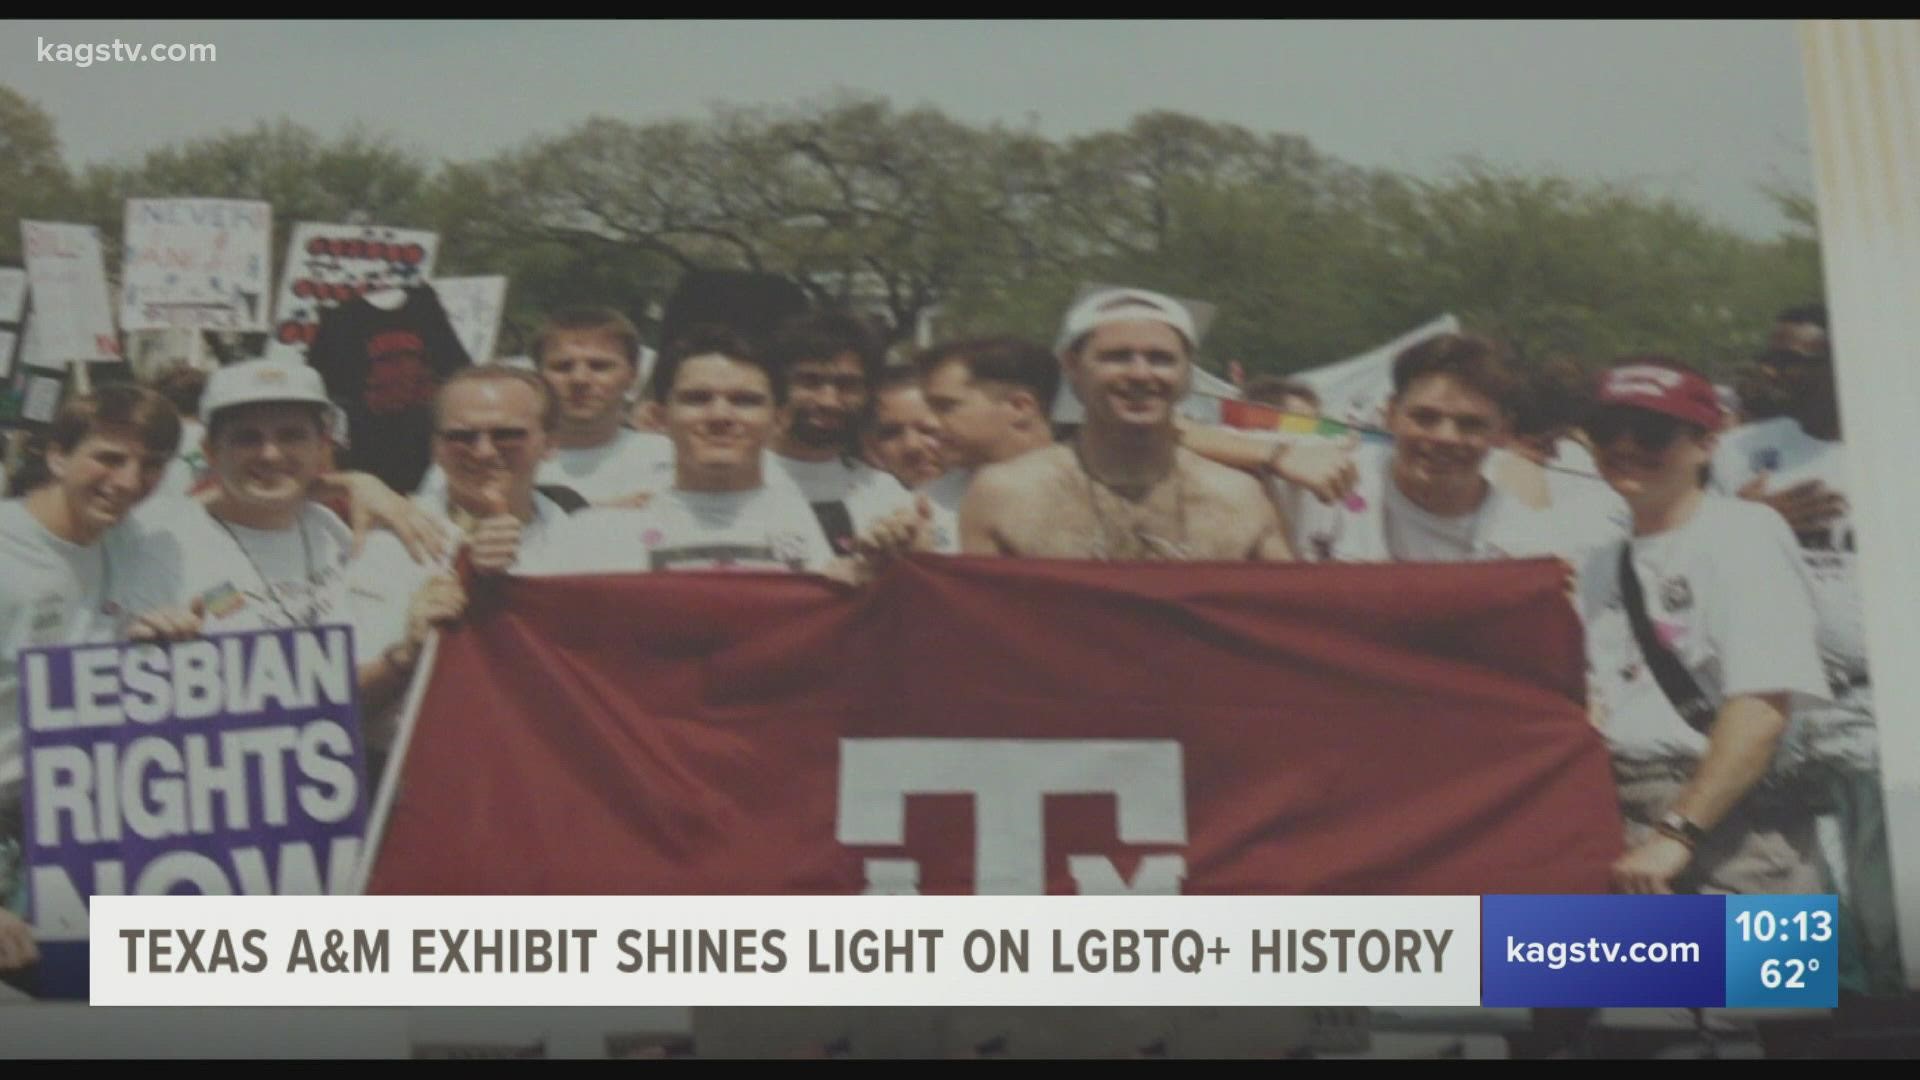 The Coming Out Together to Share Our History Exhibit dissects the importance of the modern-day gay rights movement in College Station and beyond in Texas.